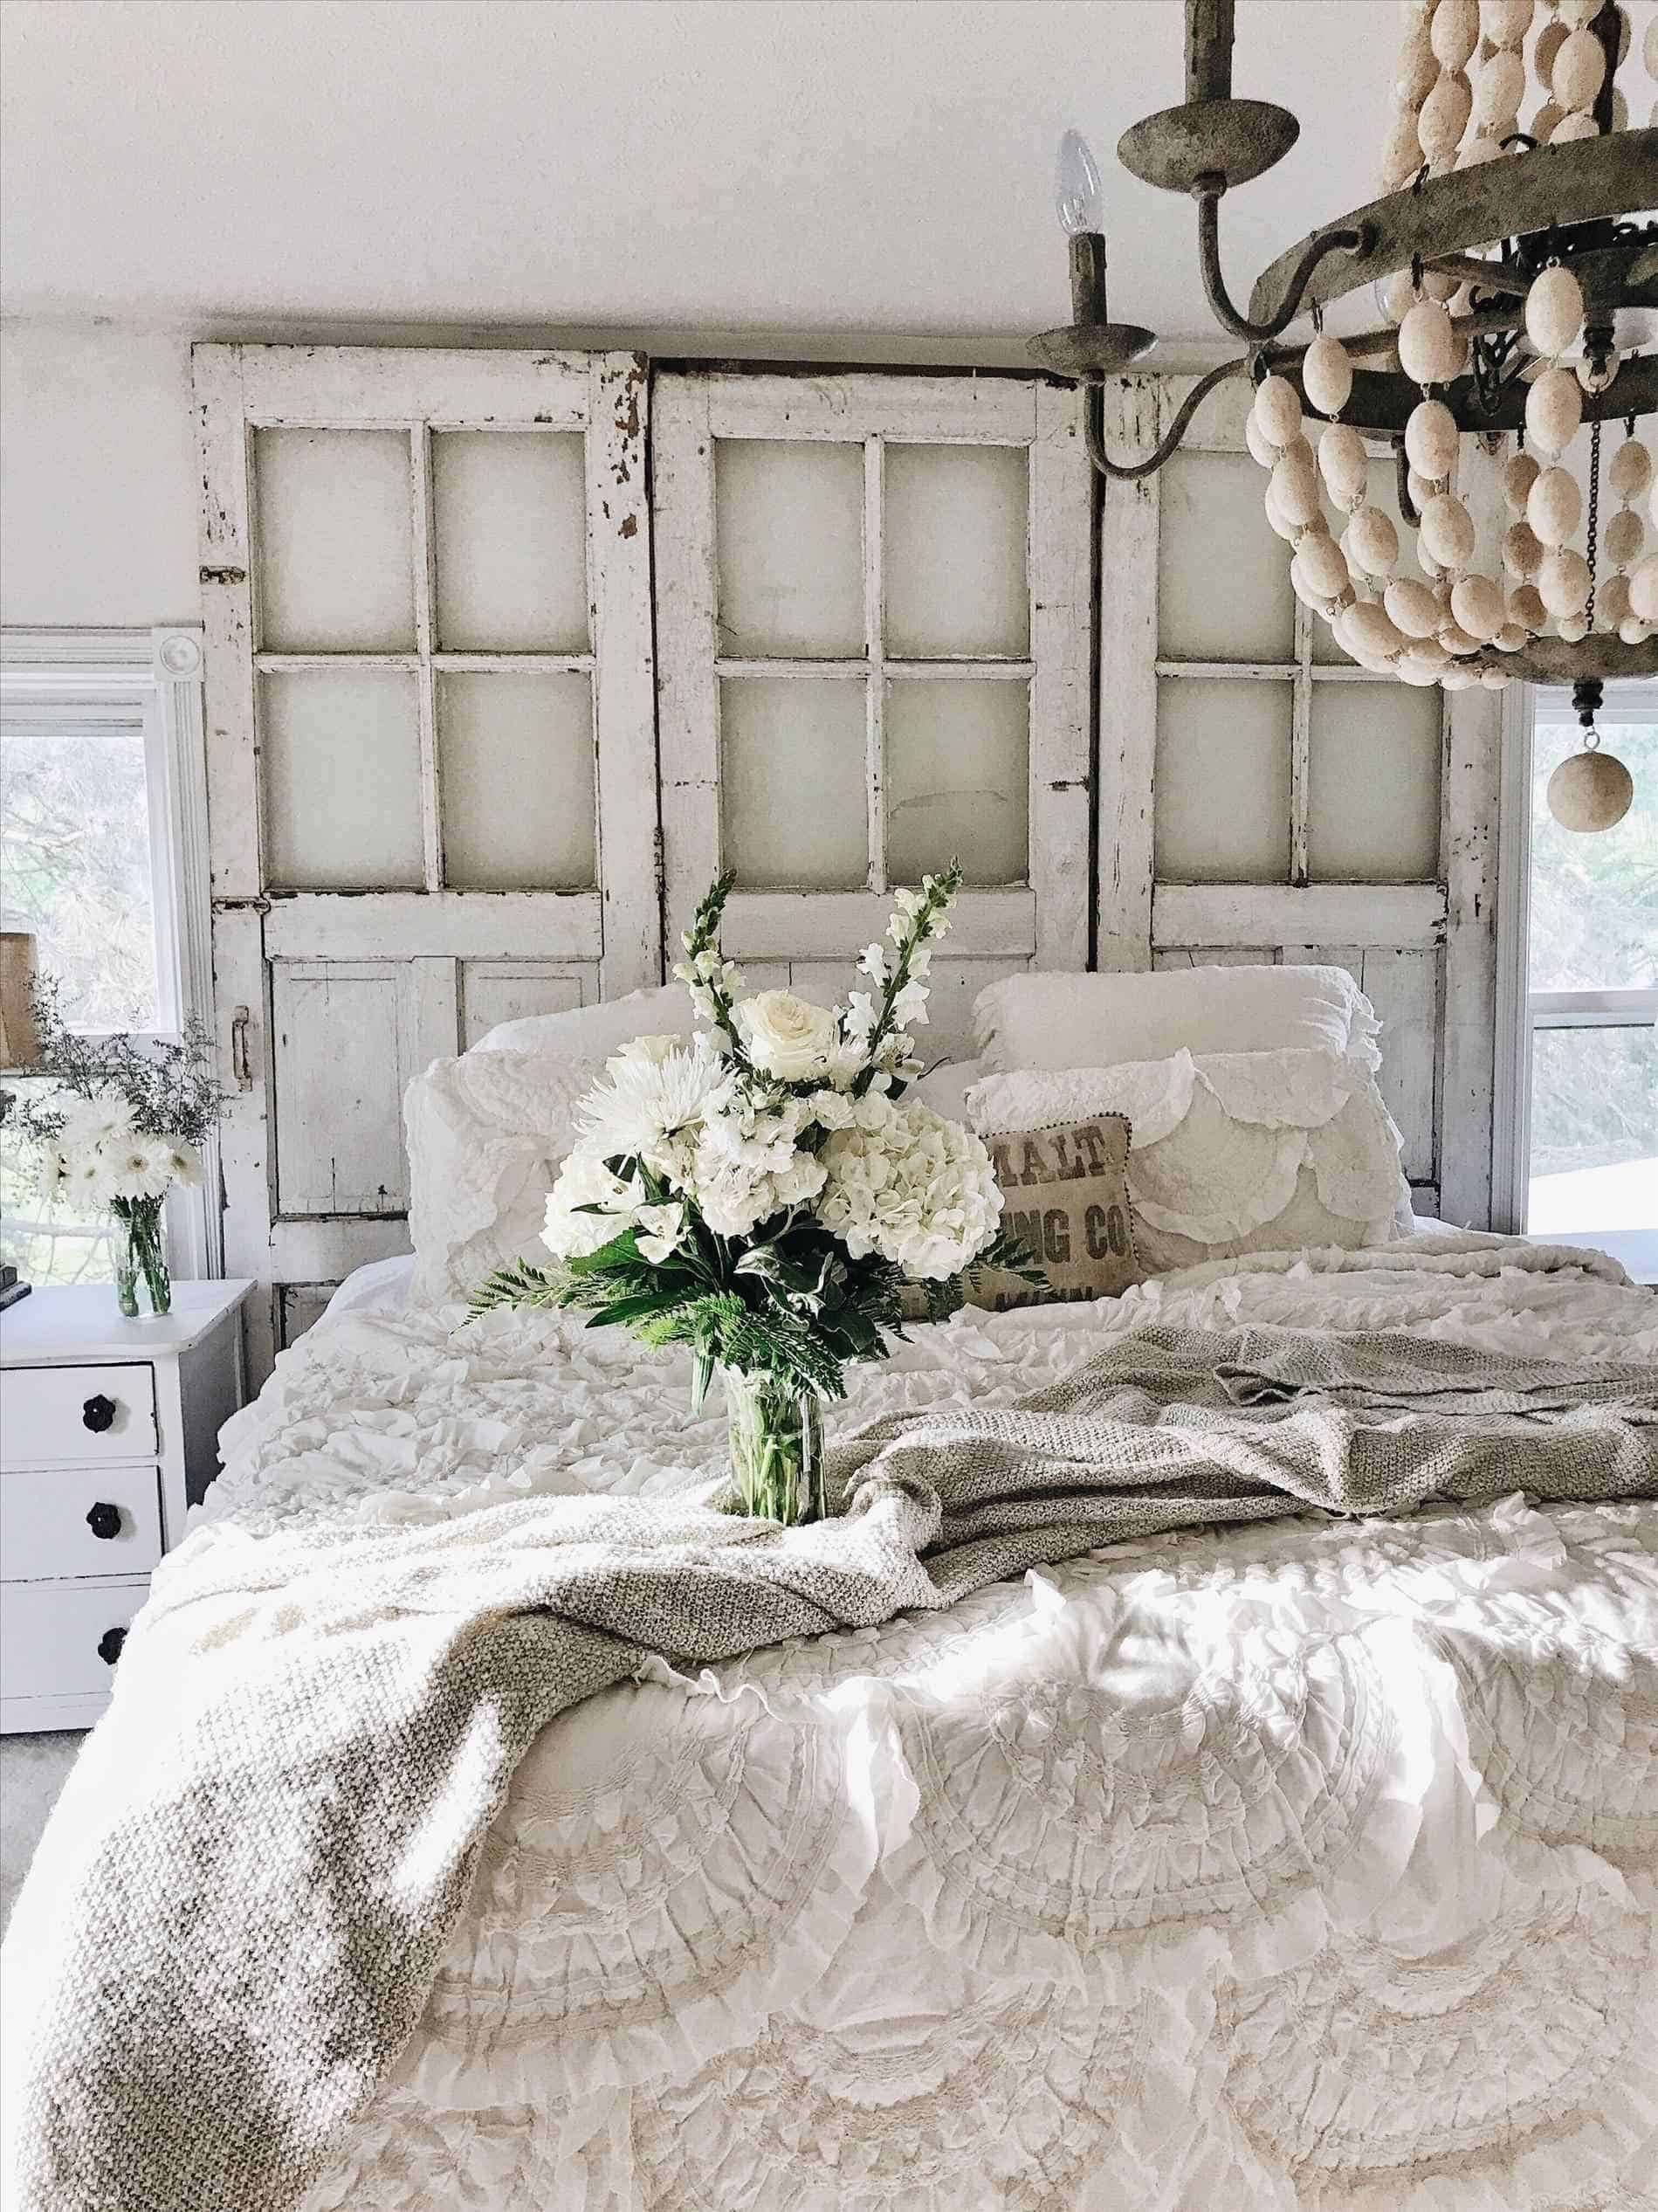 Shabby Chic Bedrooms Images
 Beautiful Shabby Chic Bedroom Ideas To Take In Consideration